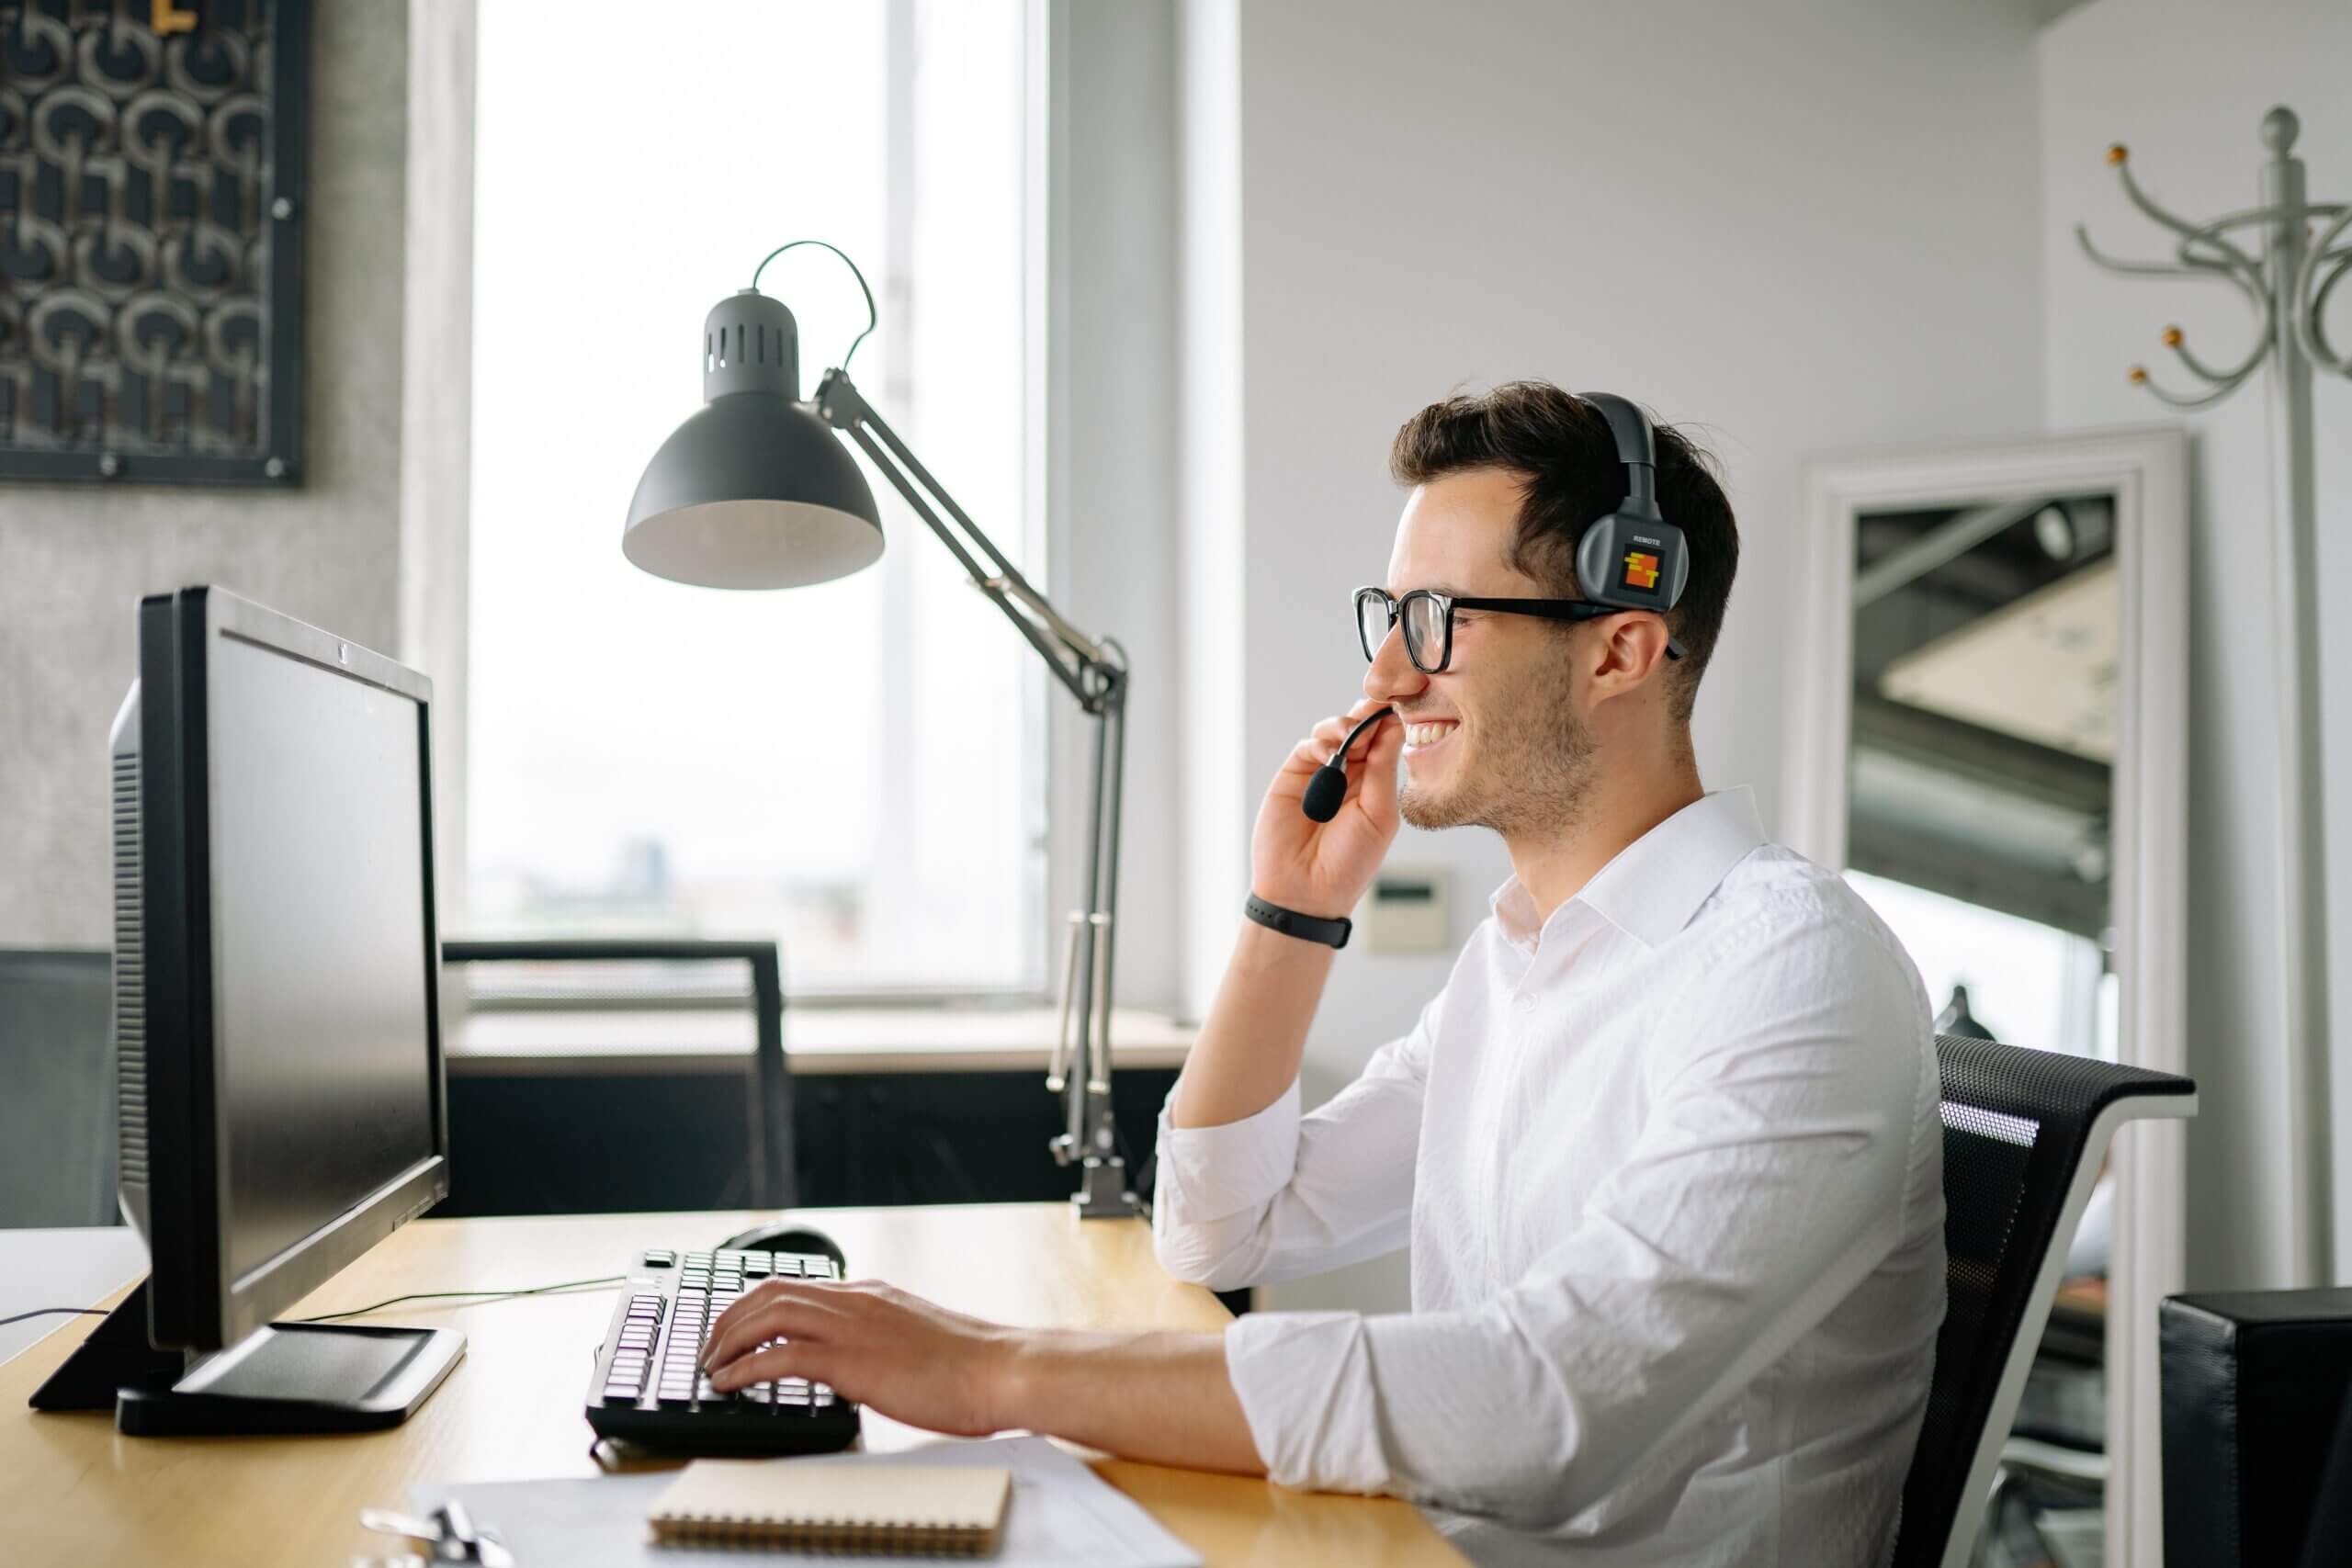 Customer support agent conversing using a headset